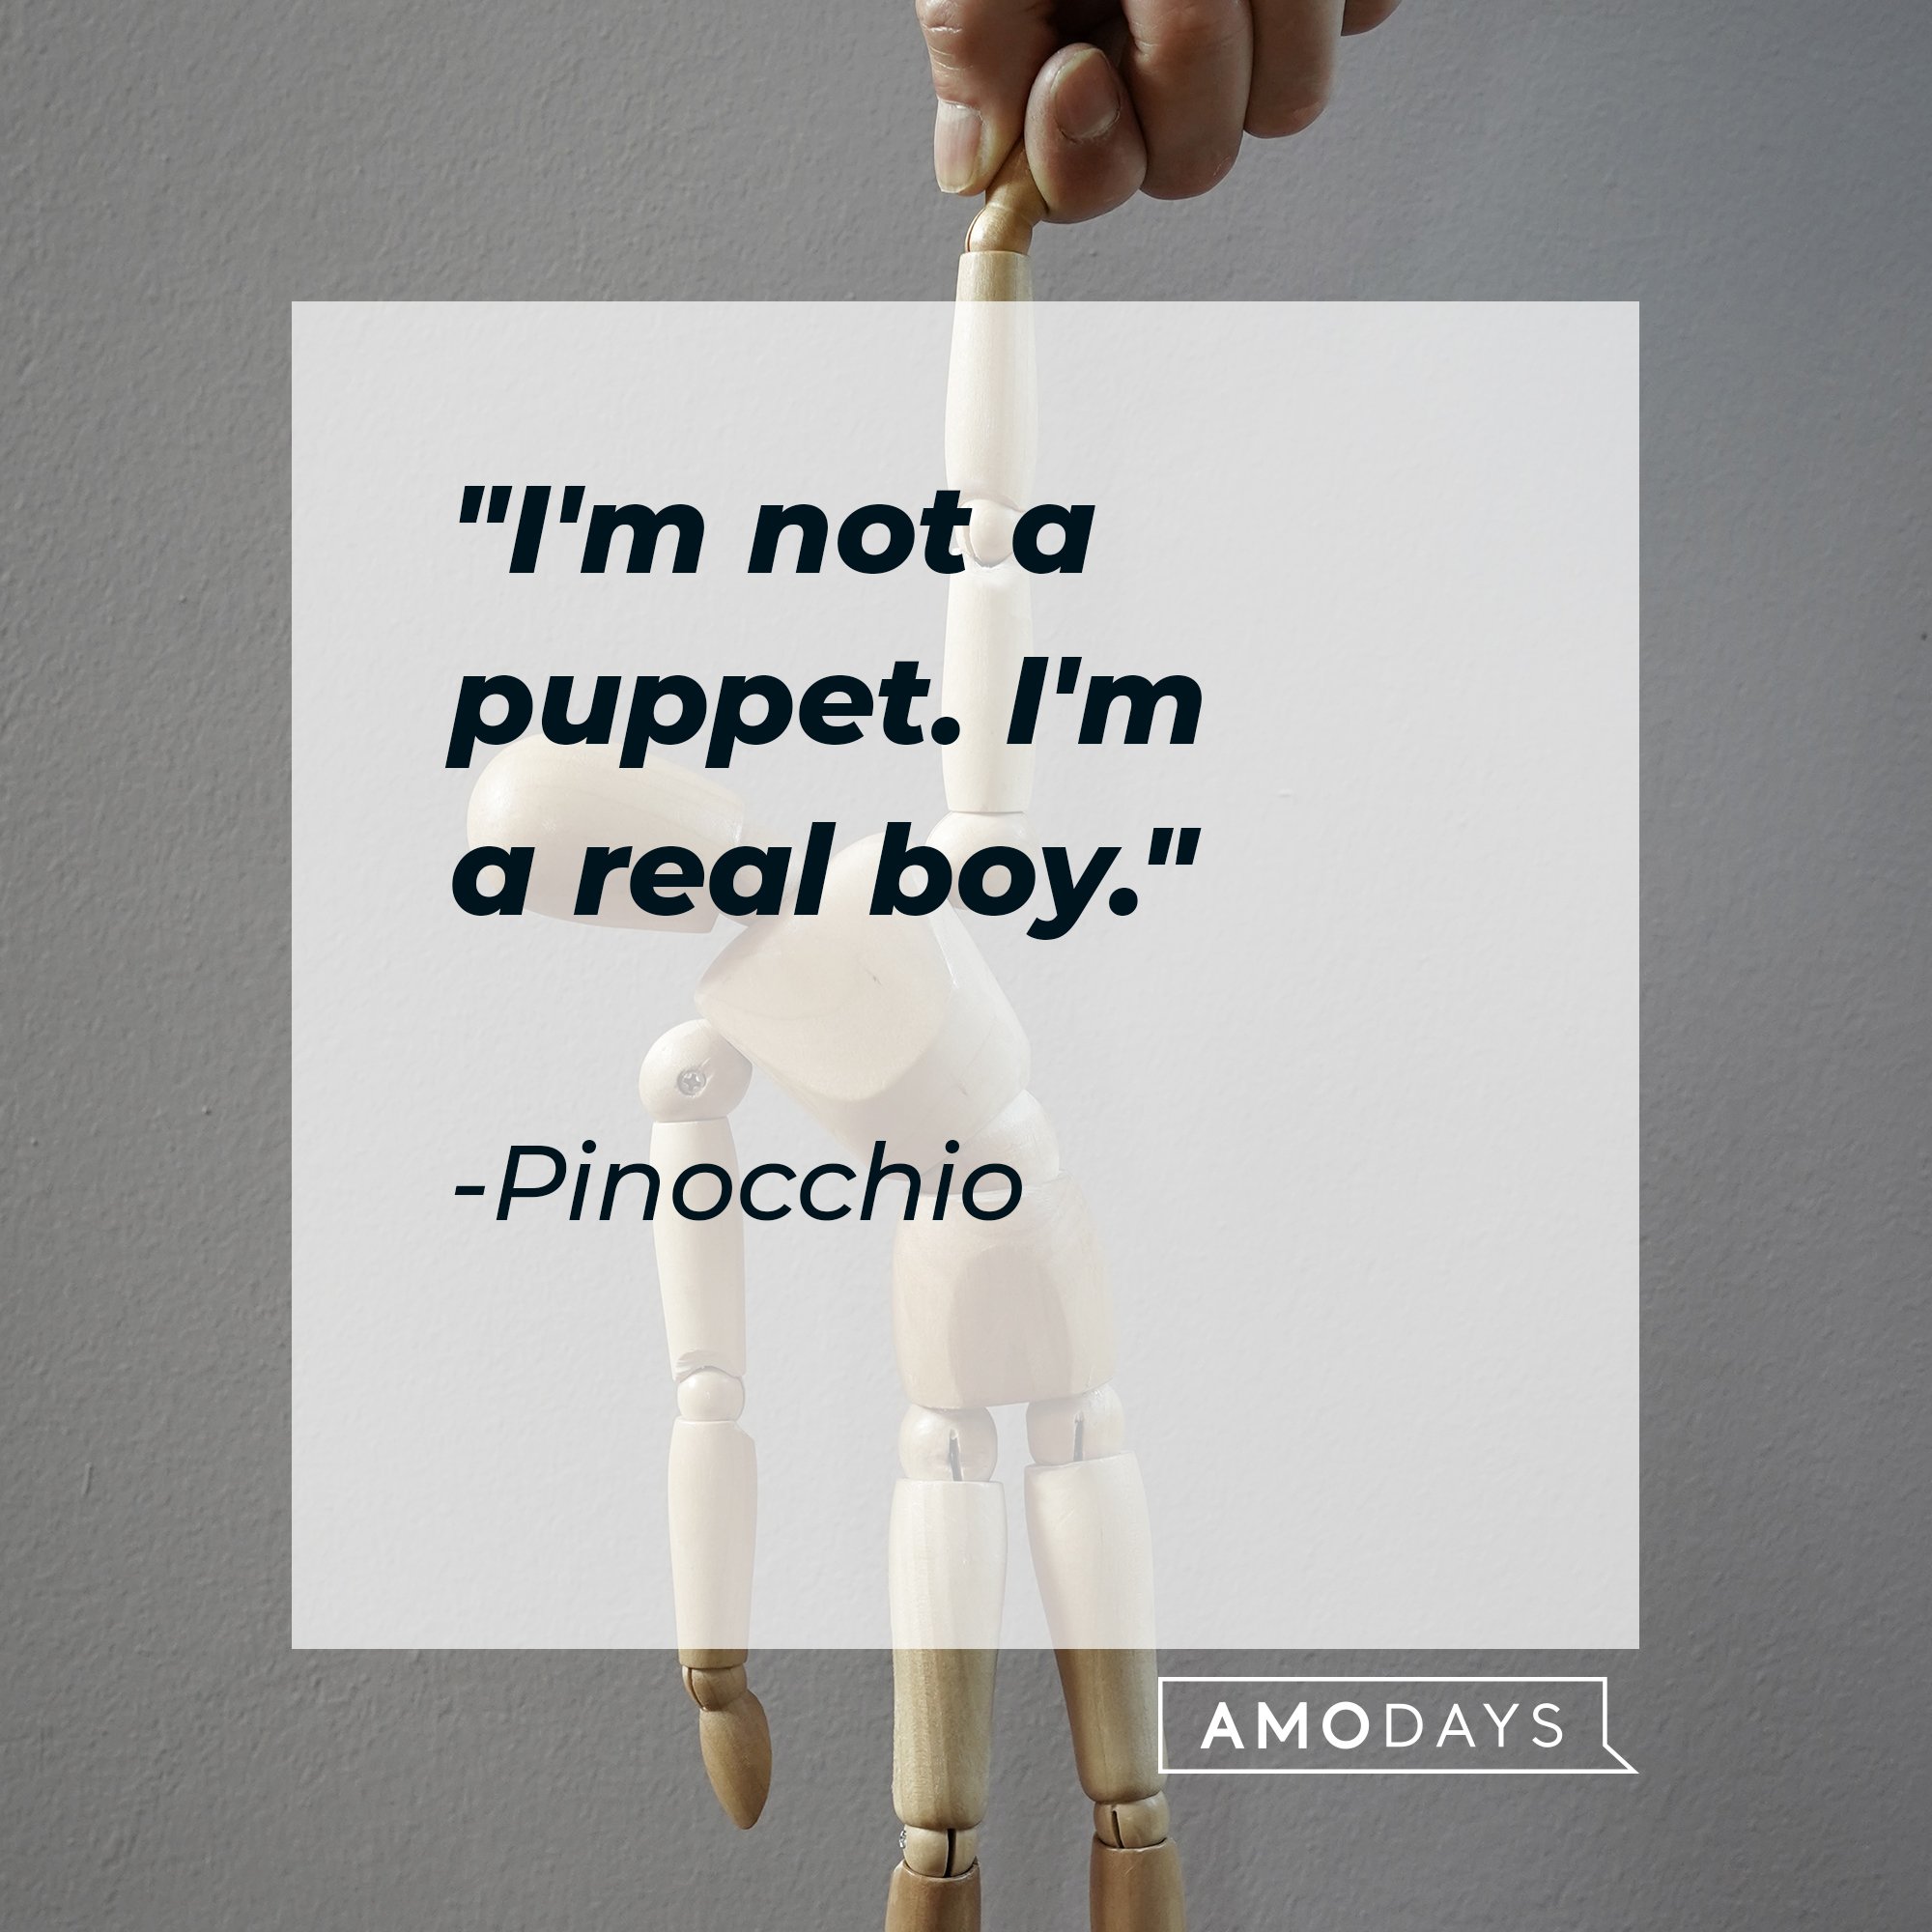  Pinocchio's quote: "I'm not a puppet. I'm a real boy." | Image: AmoDays